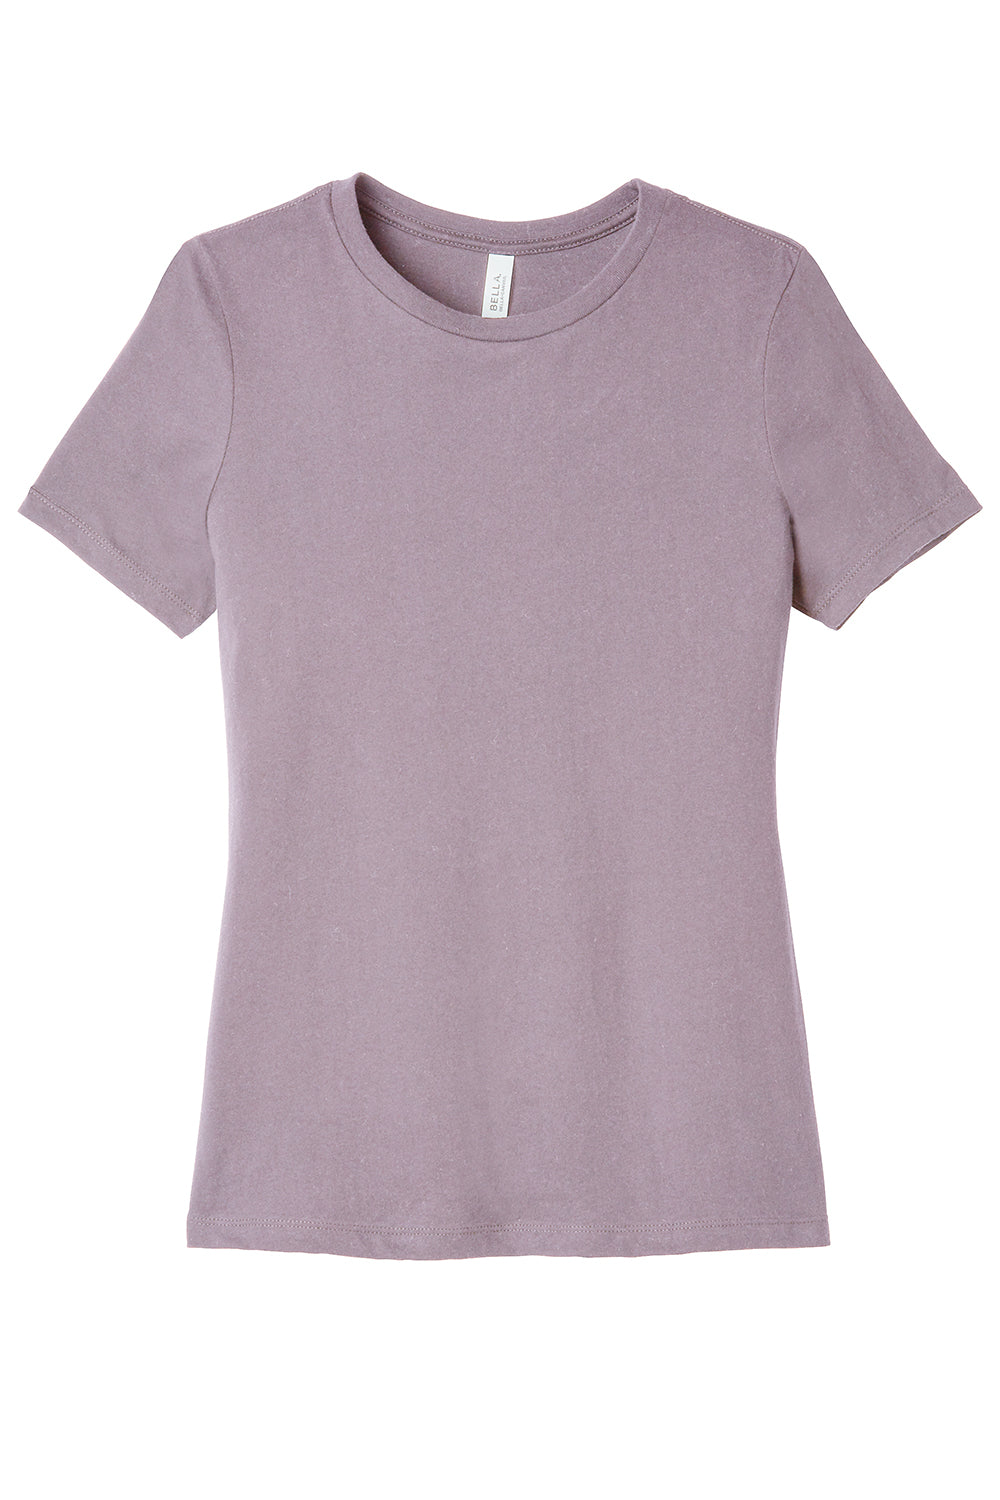 Bella + Canvas BC6400/B6400/6400 Womens Relaxed Jersey Short Sleeve Crewneck T-Shirt Orchid Flat Front